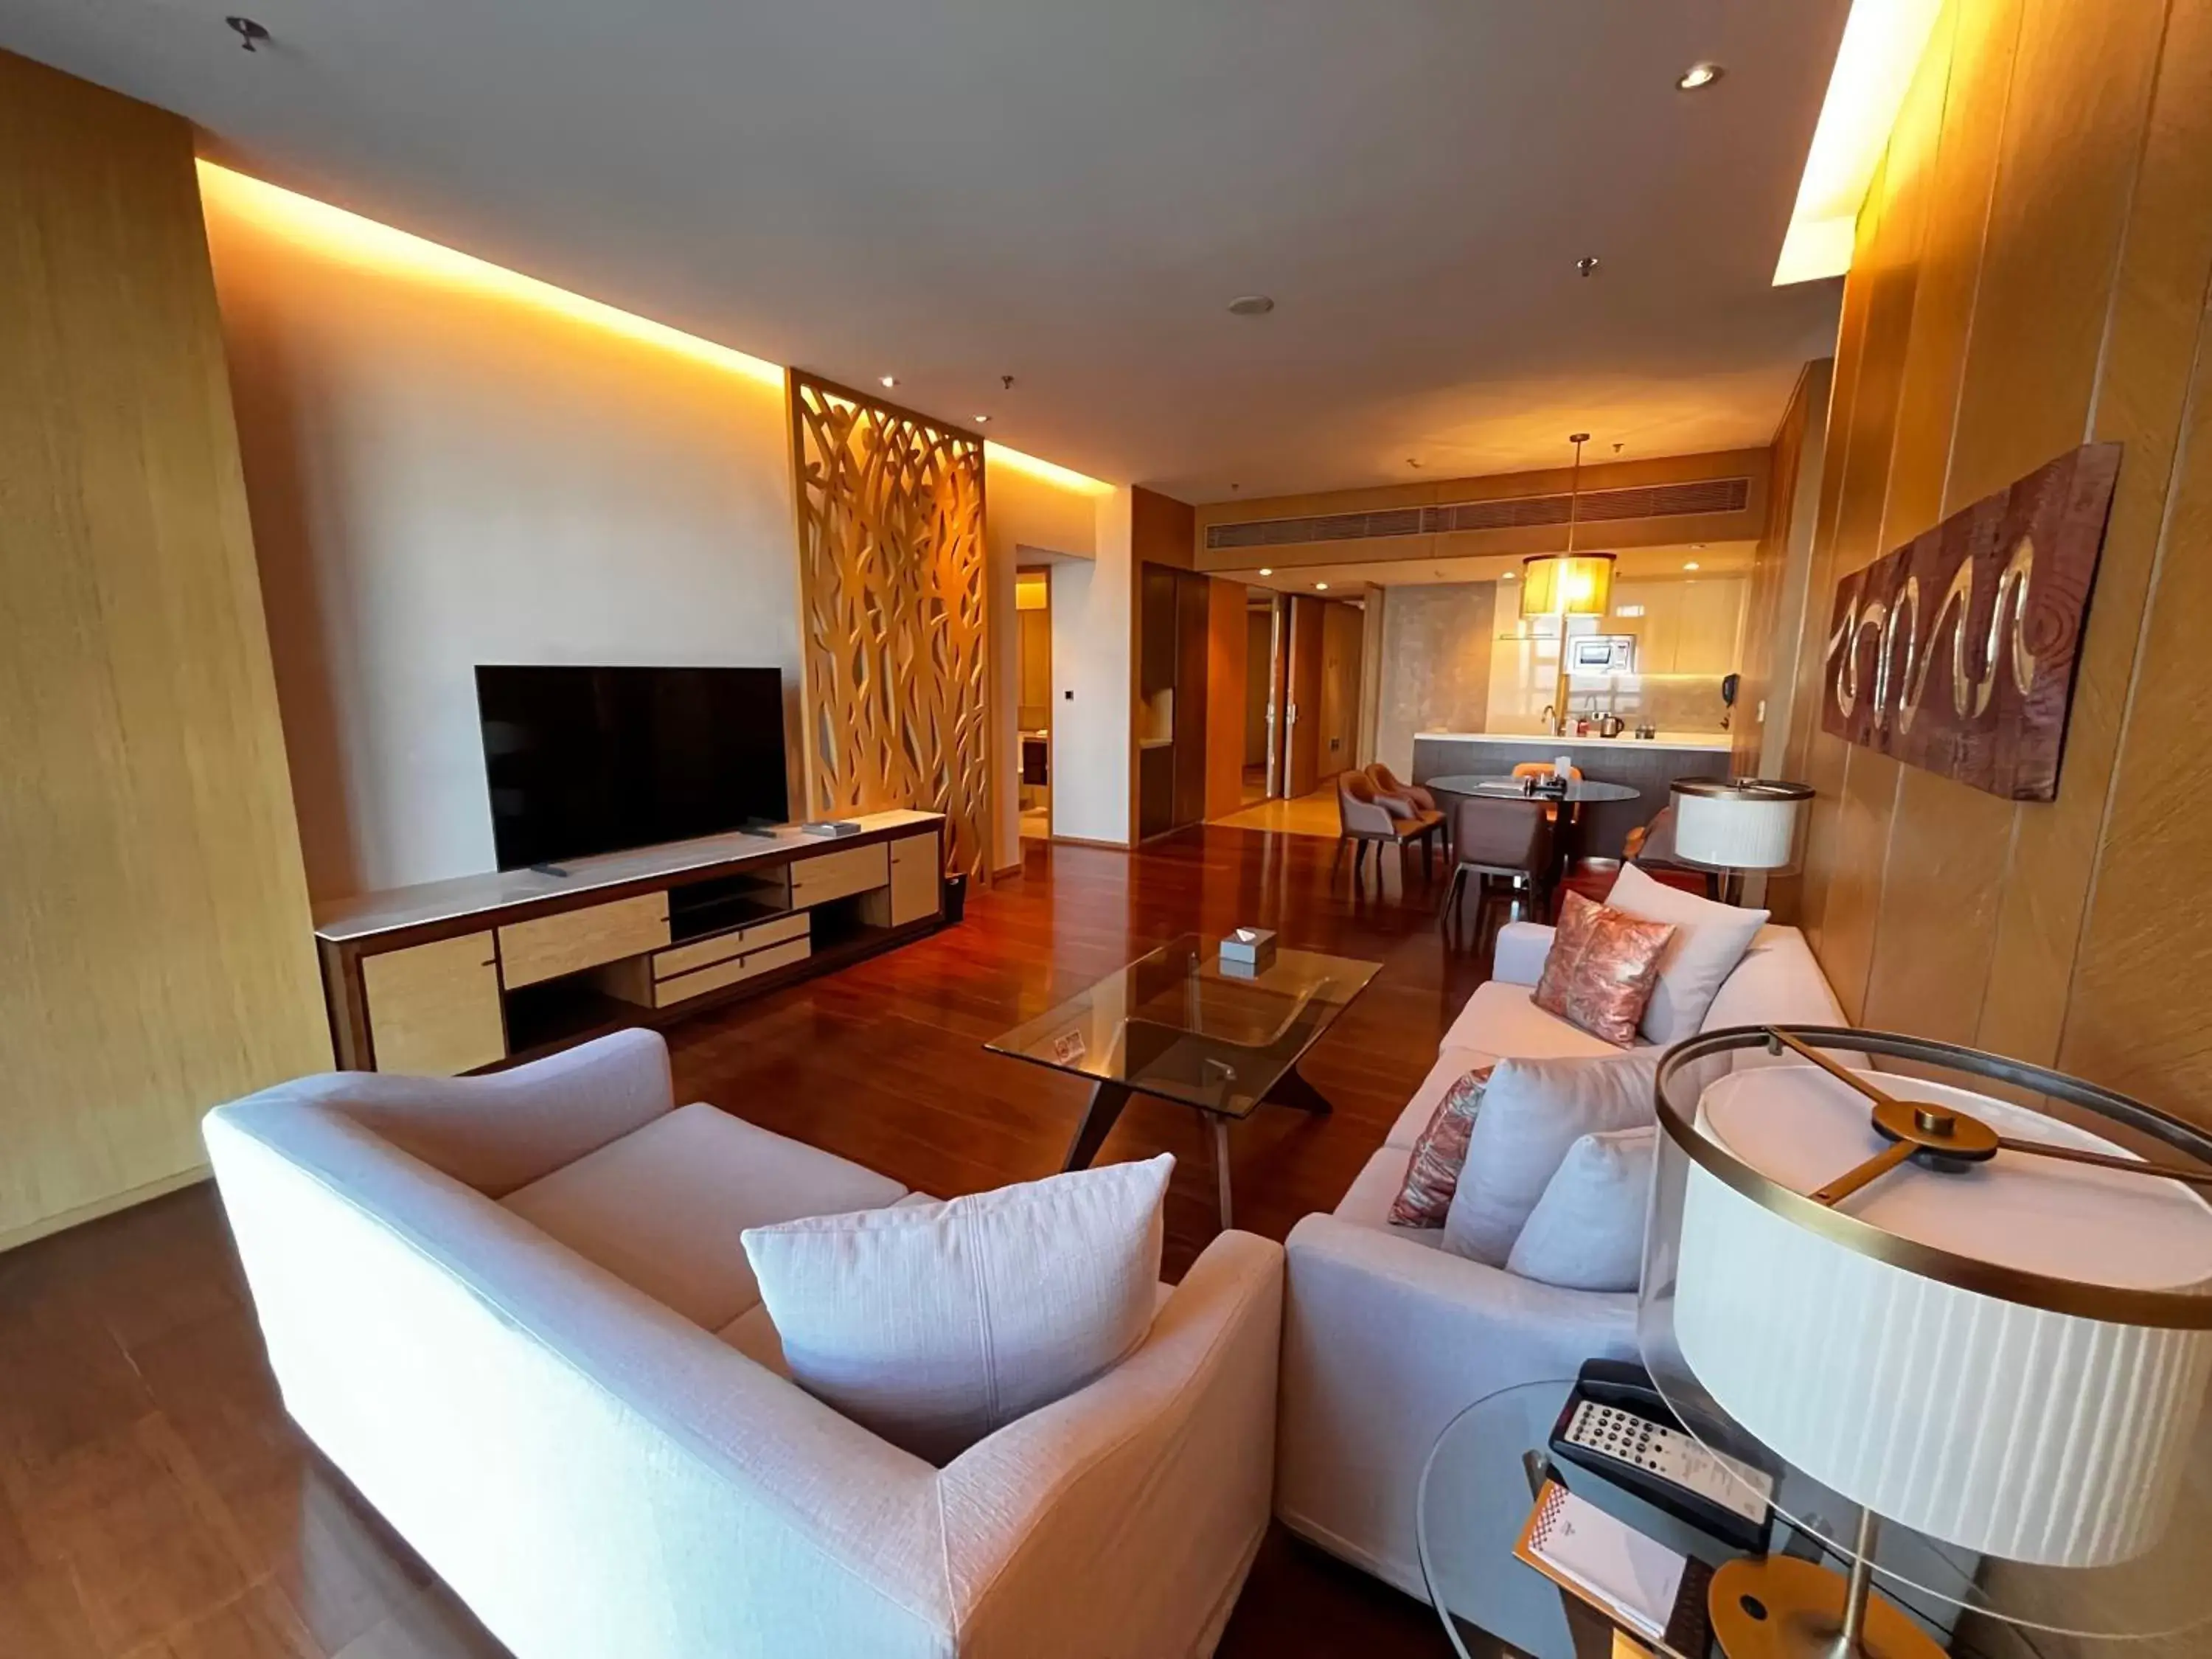 TV and multimedia, Seating Area in The OCT Harbour, Shenzhen - Marriott Executive Apartments